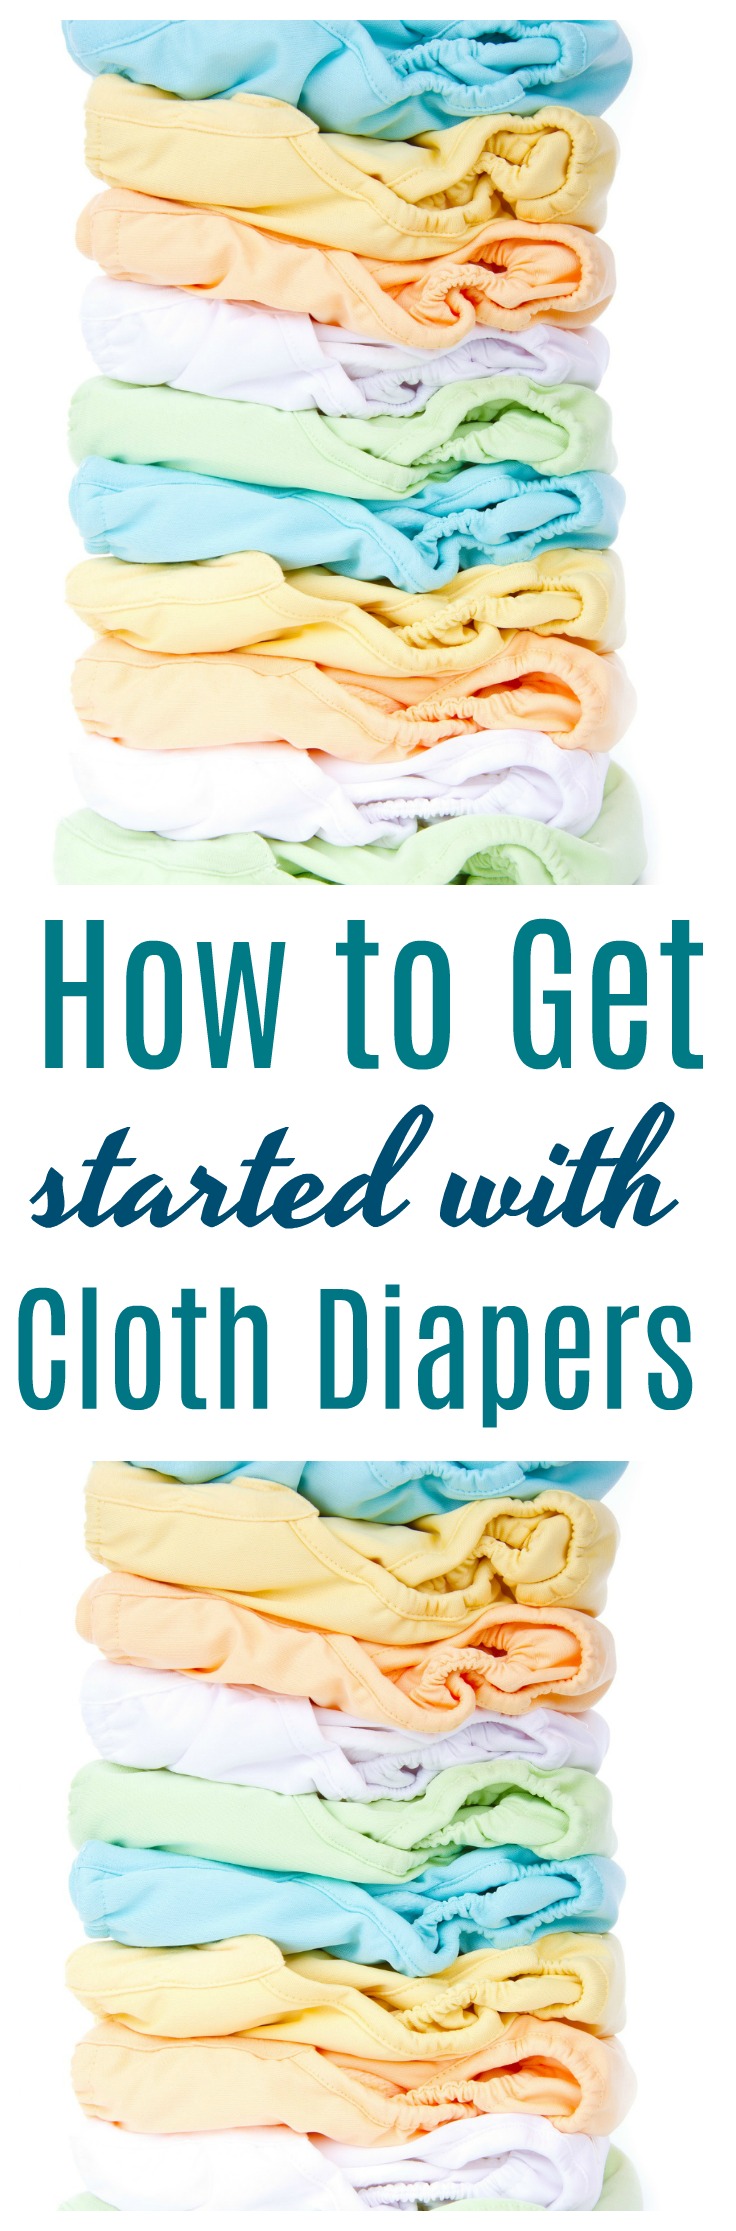 After cloth diapering 5 kids, I'm sharing my tips! Find out everything you need to know to help you get started with cloth diapers! #baby #diapers #cloth